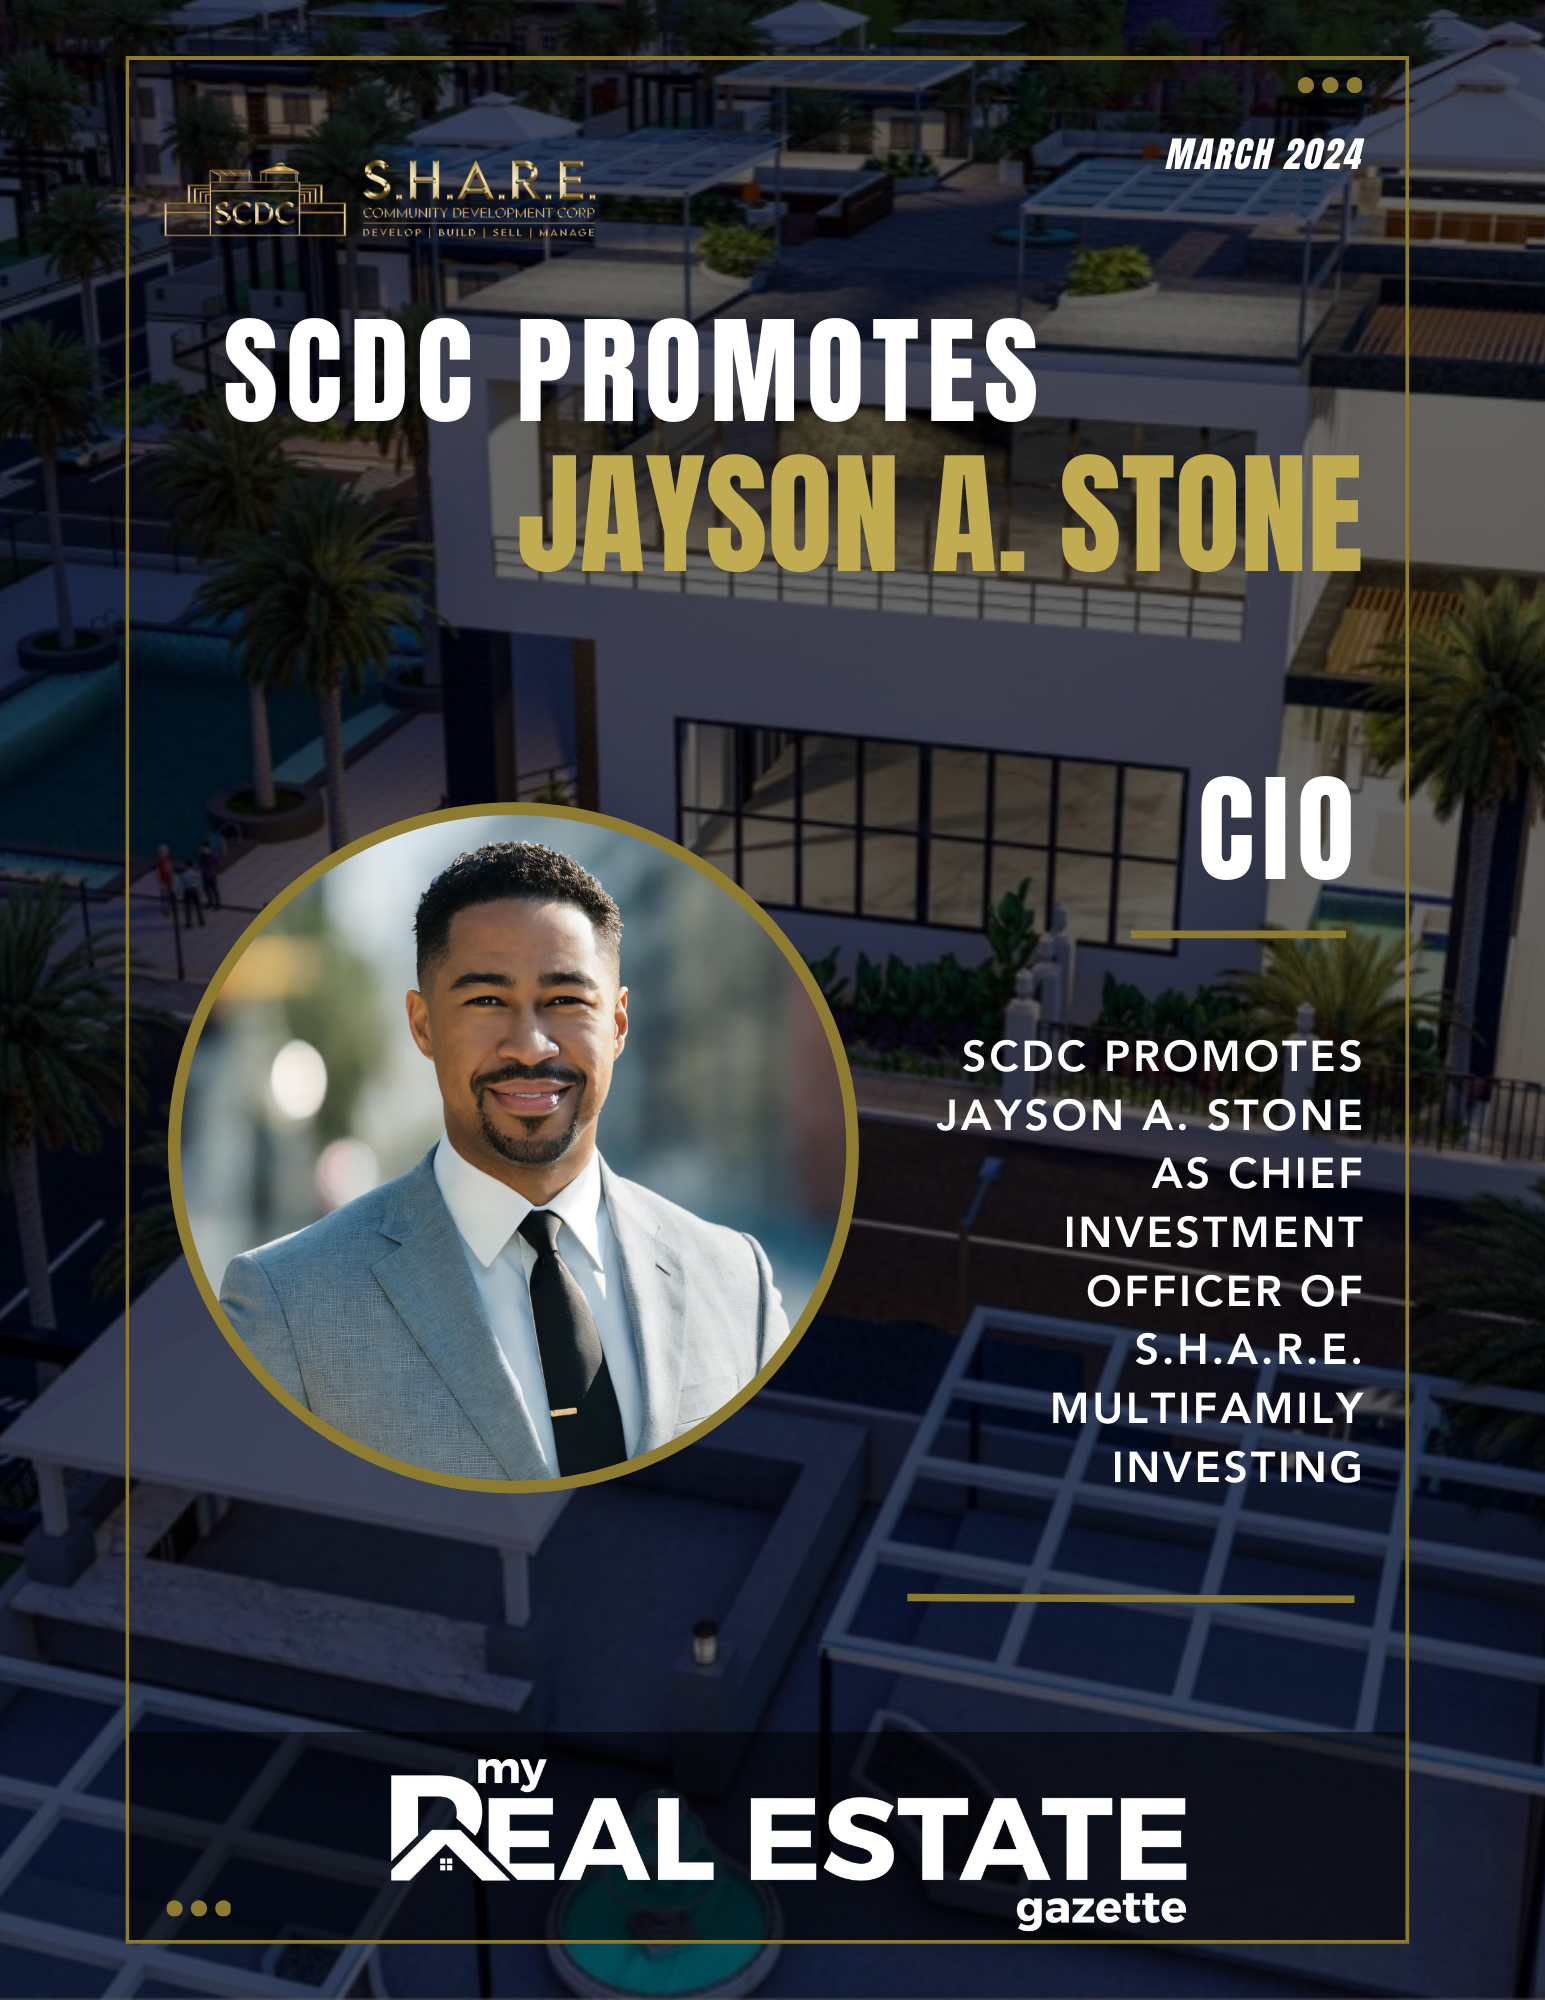 SCDC PROMOTES JAYSON A. STONE TO CHIEF INVESTMENT OFFICER OF S.H.A.R.E. MULTIFAMILY INVESTMENTS